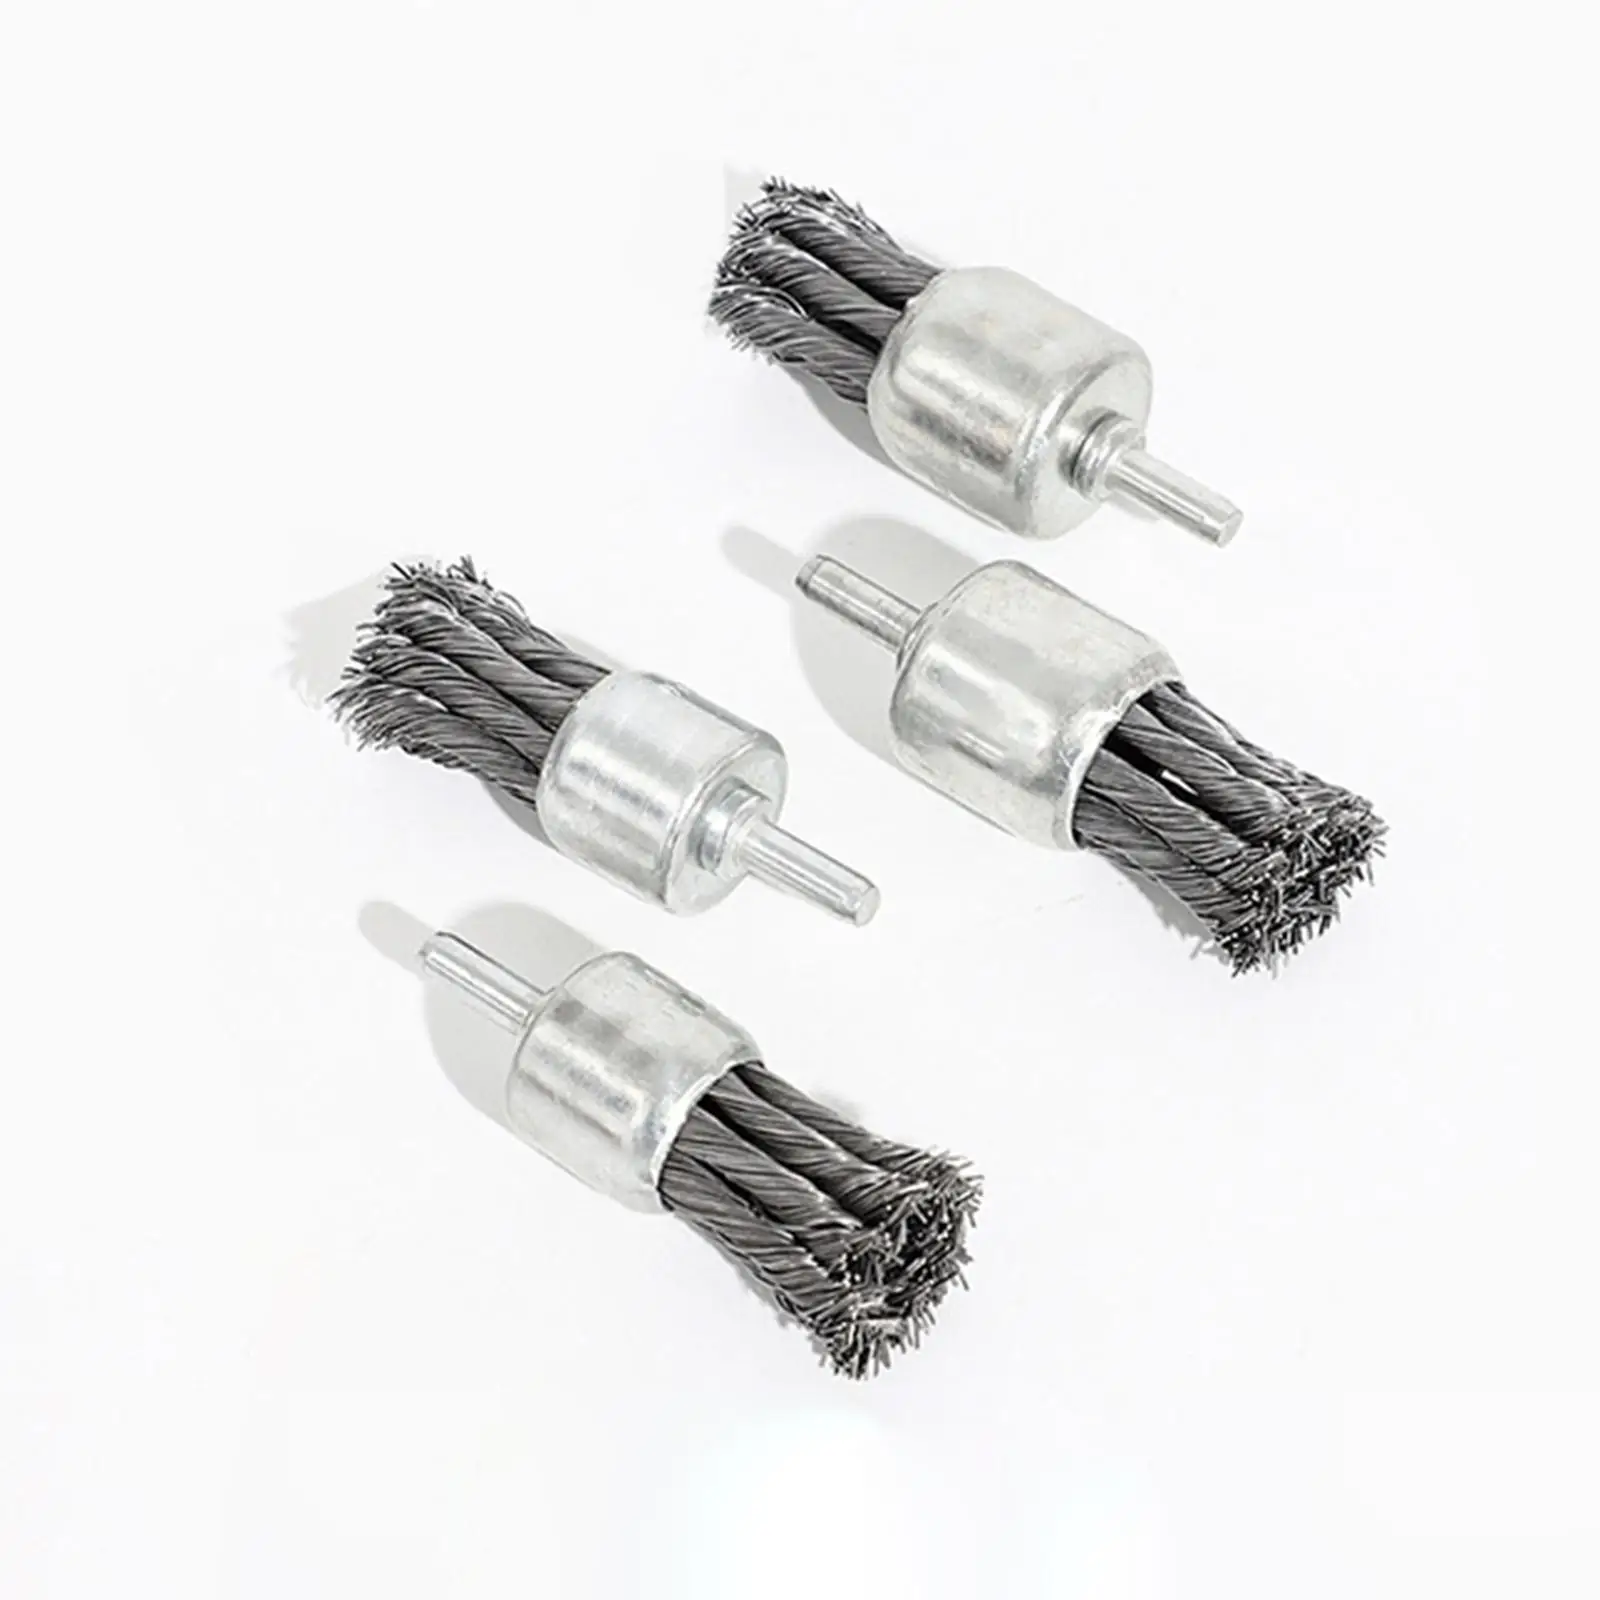 Steel Wire Brush Replace Accessory Angle Grinder Surface Polishing Drill Attachment Rotary Knot Wire End Brush for Drill